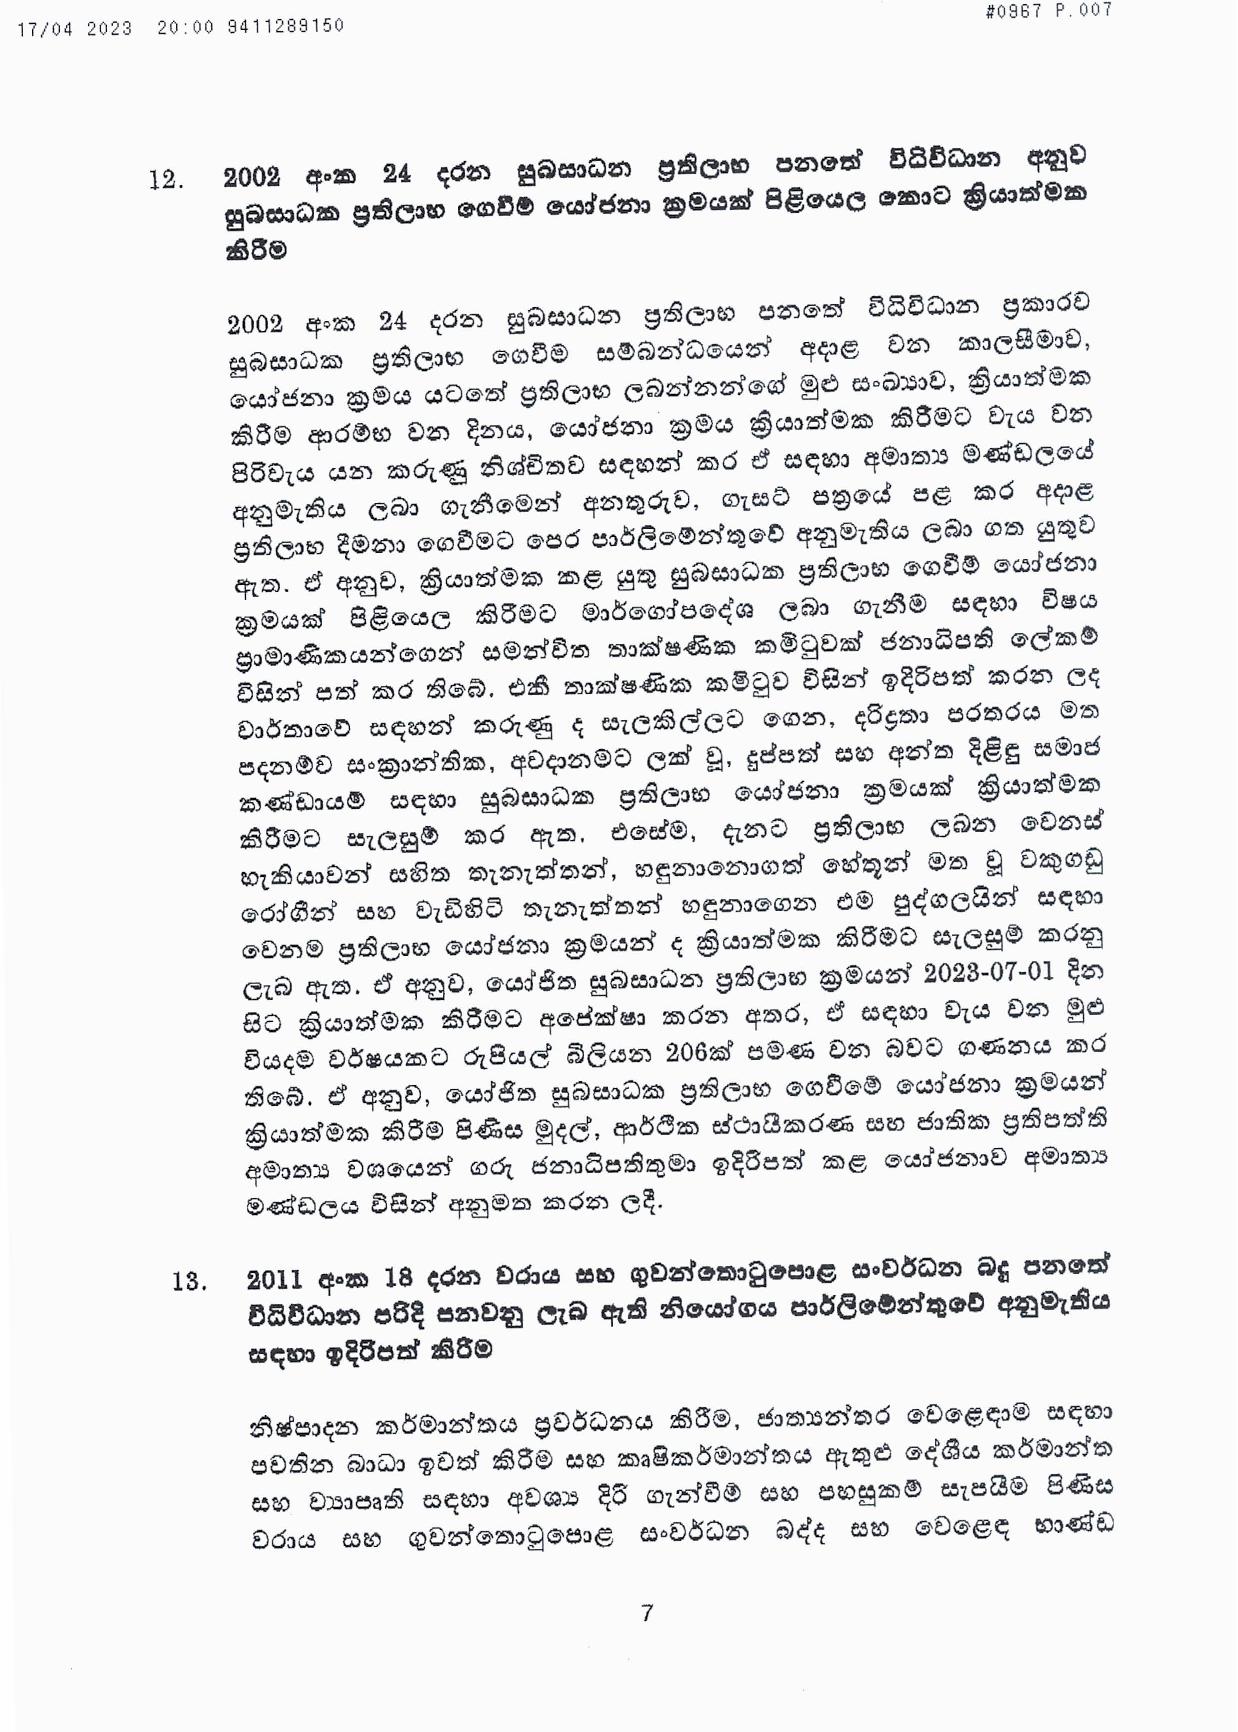 Cabinet Decisions on 17.04.2023 page 007